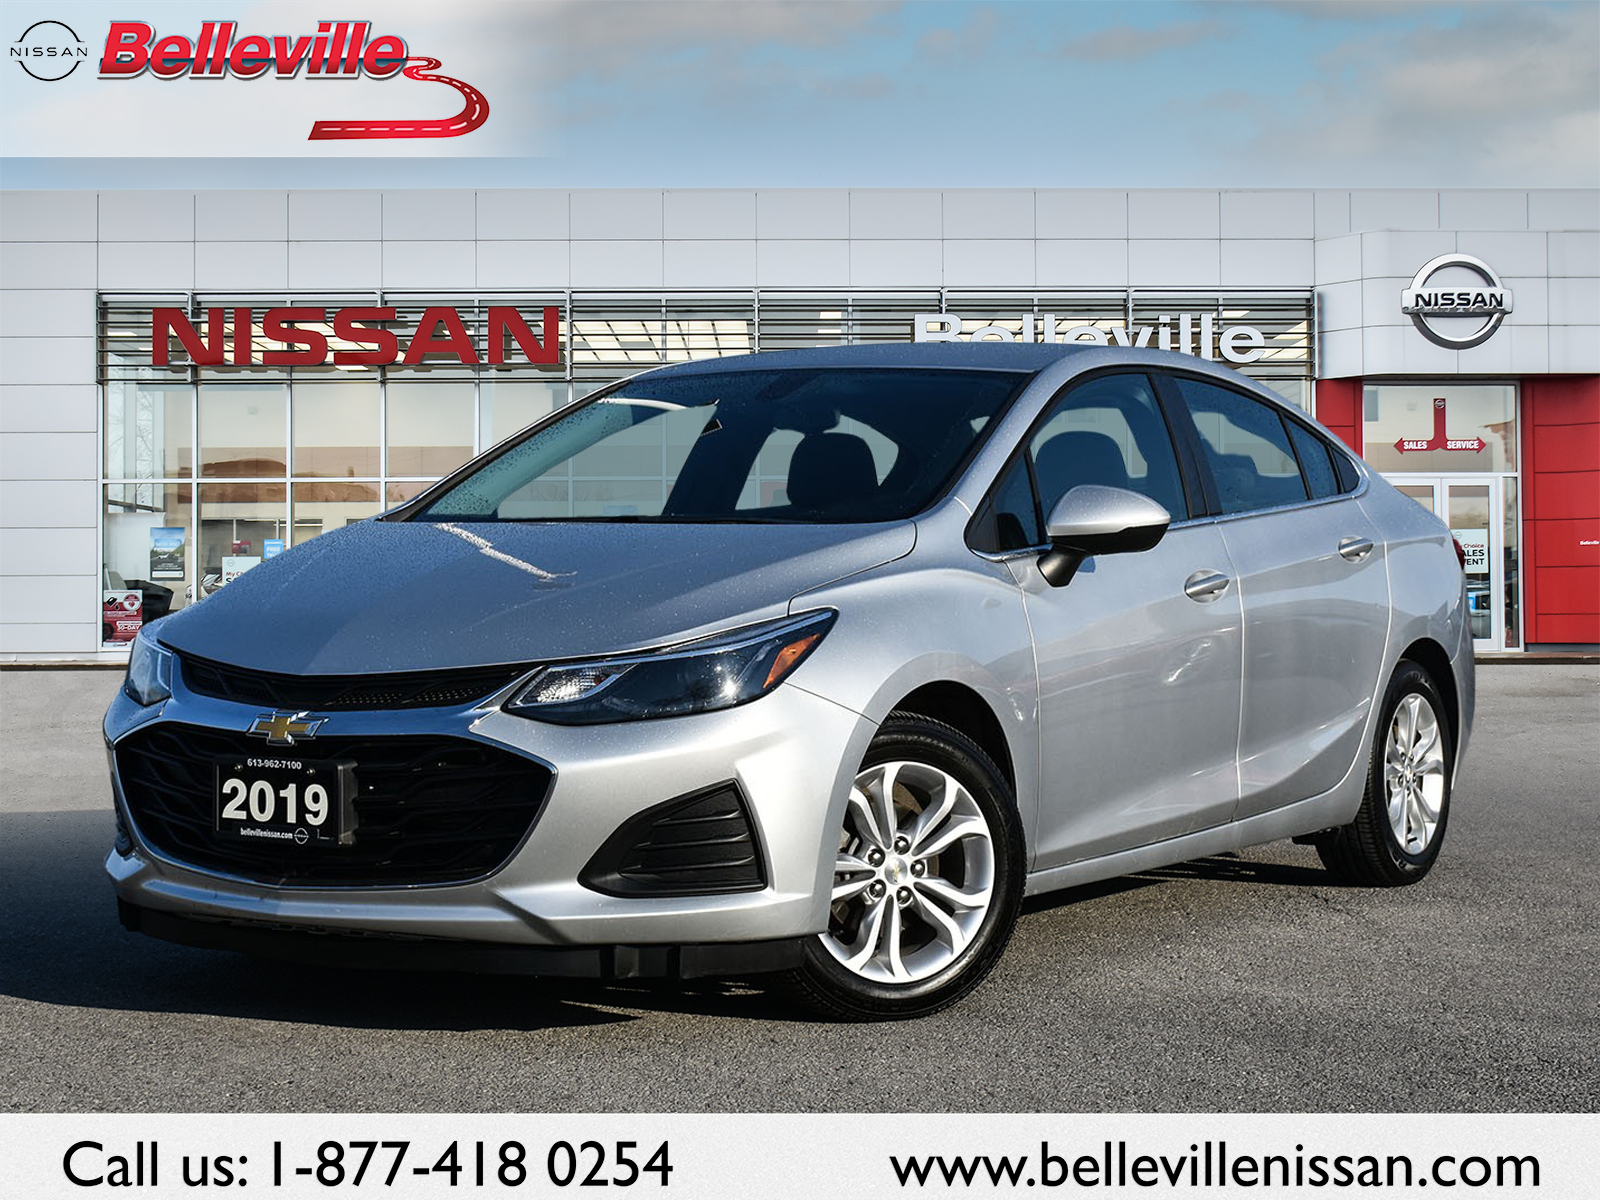 2019 Chevrolet Cruze LT LOW KMS HEATED SEATS CLEAN CARFAX